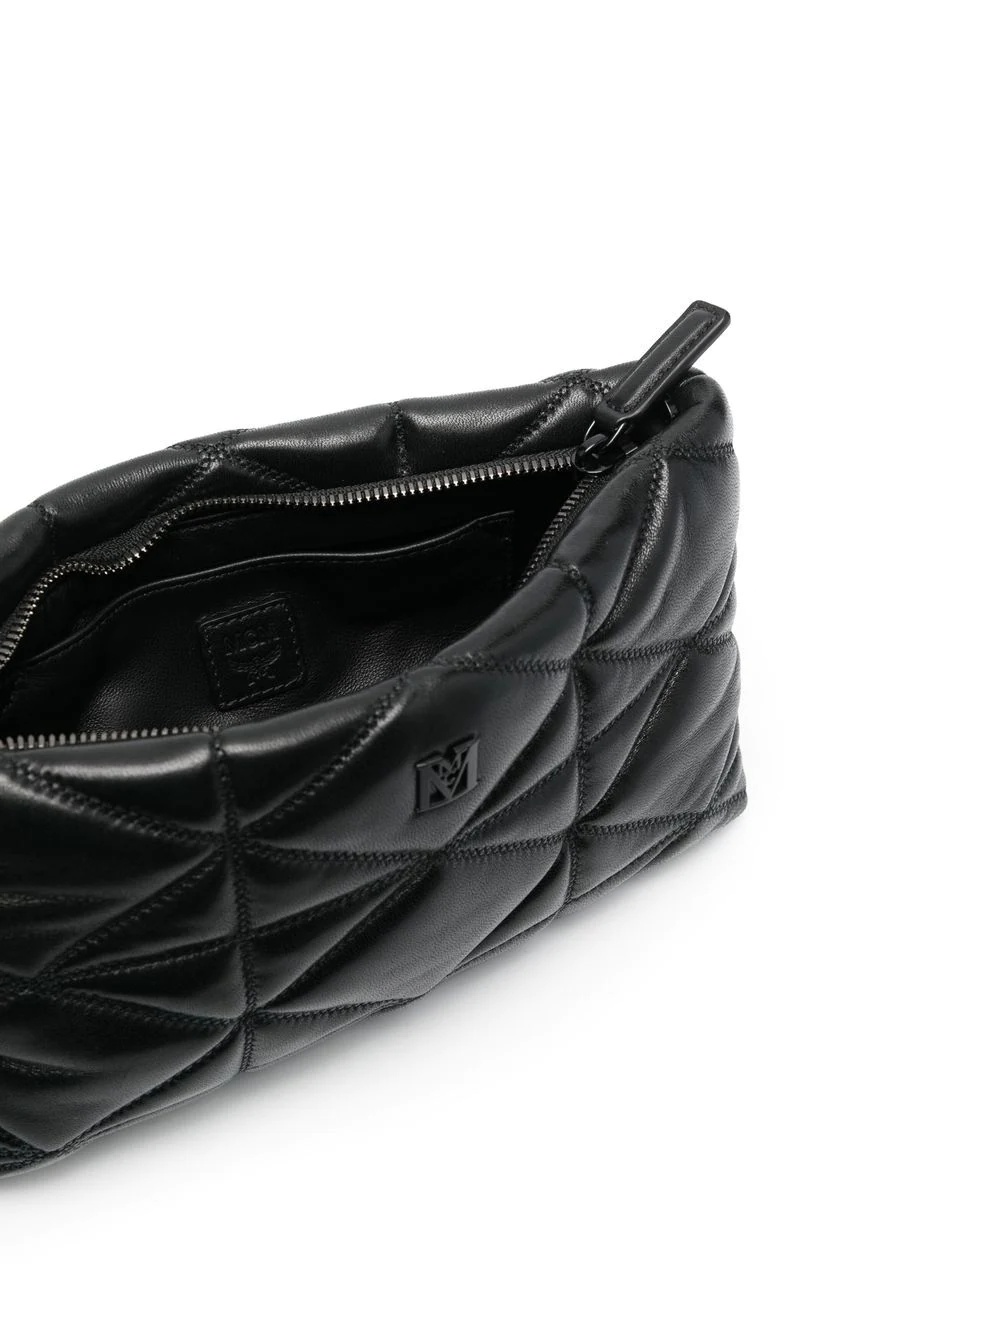 Mcm Travia Shoulder Bag in Cloud Quilted Leather Black Leather